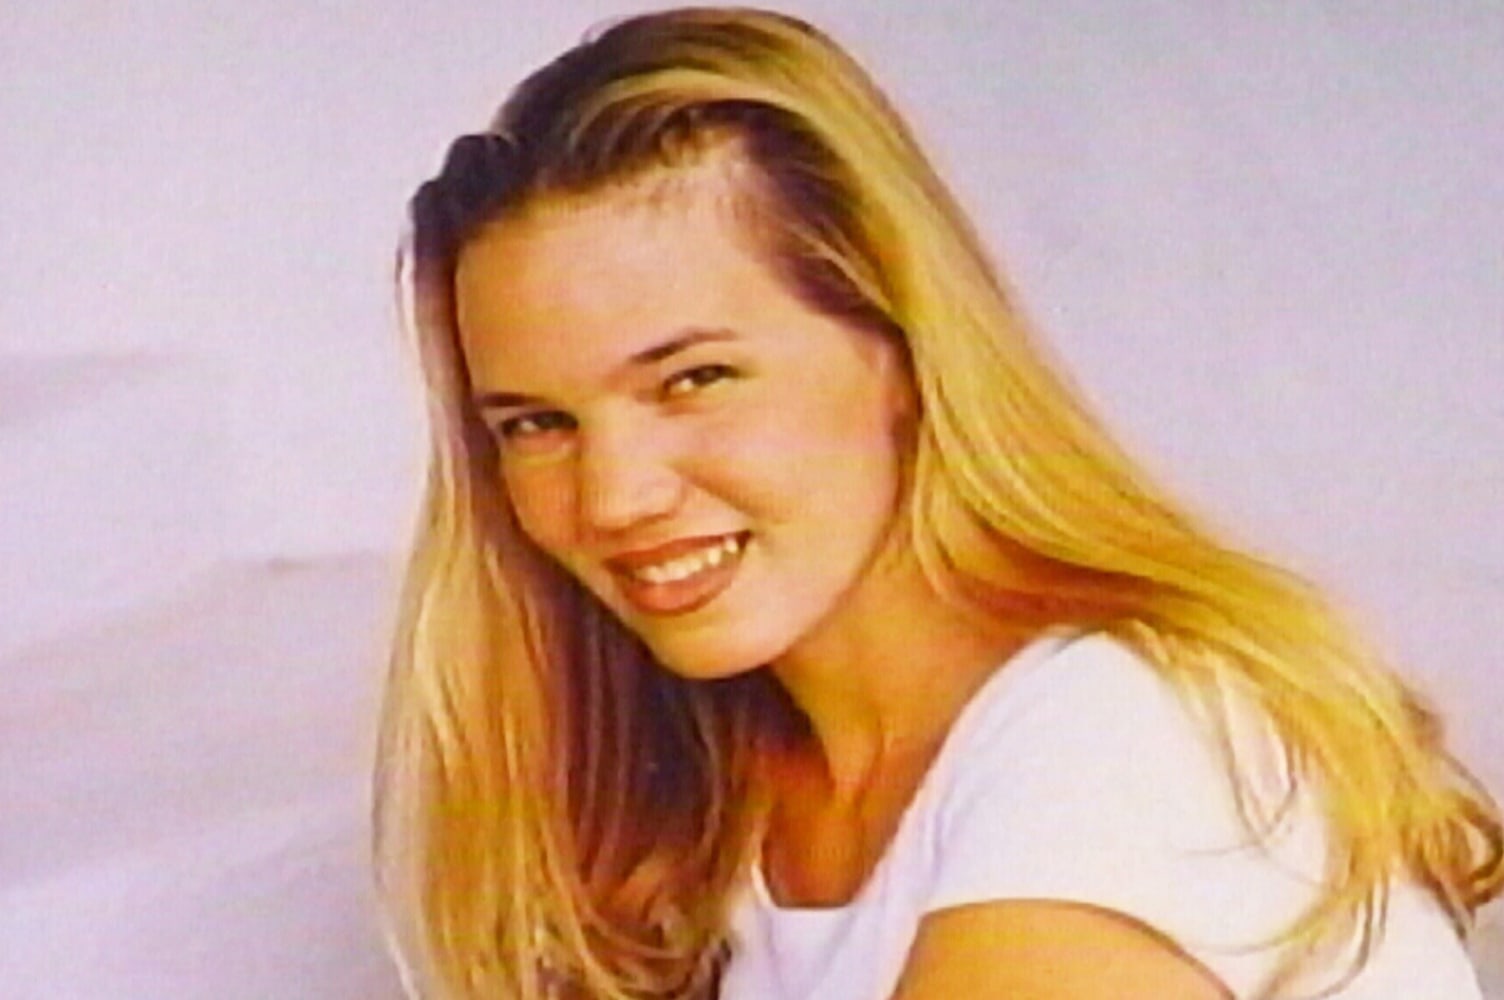 'Items of Interest' Found in Search for Kristin Smart, Student Missing Since 1996 ...